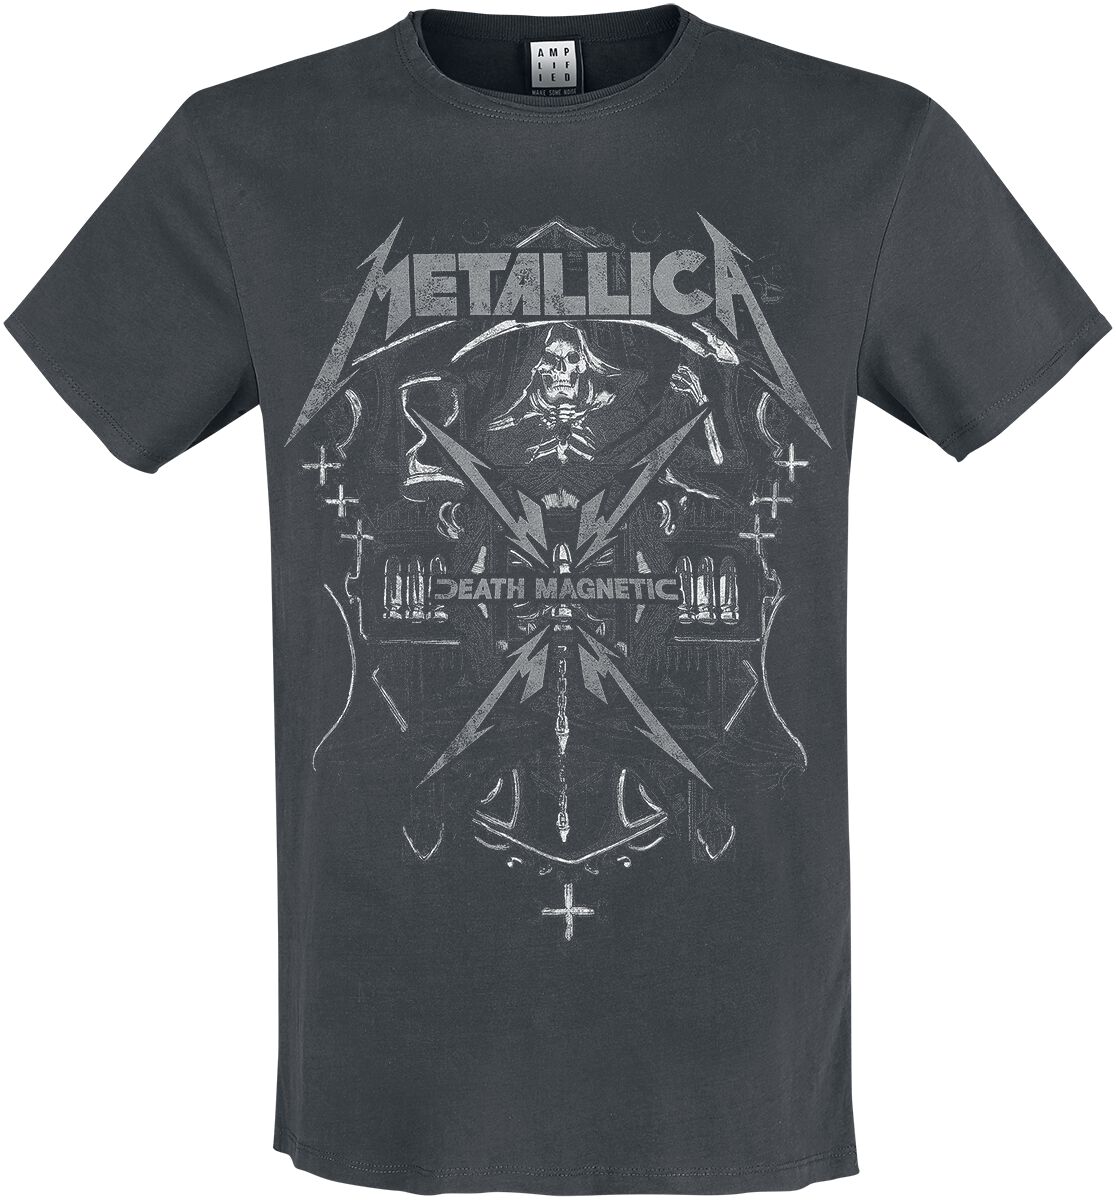 Image of Metallica Amplified Collection - Death Magnatic T-Shirt charcoal